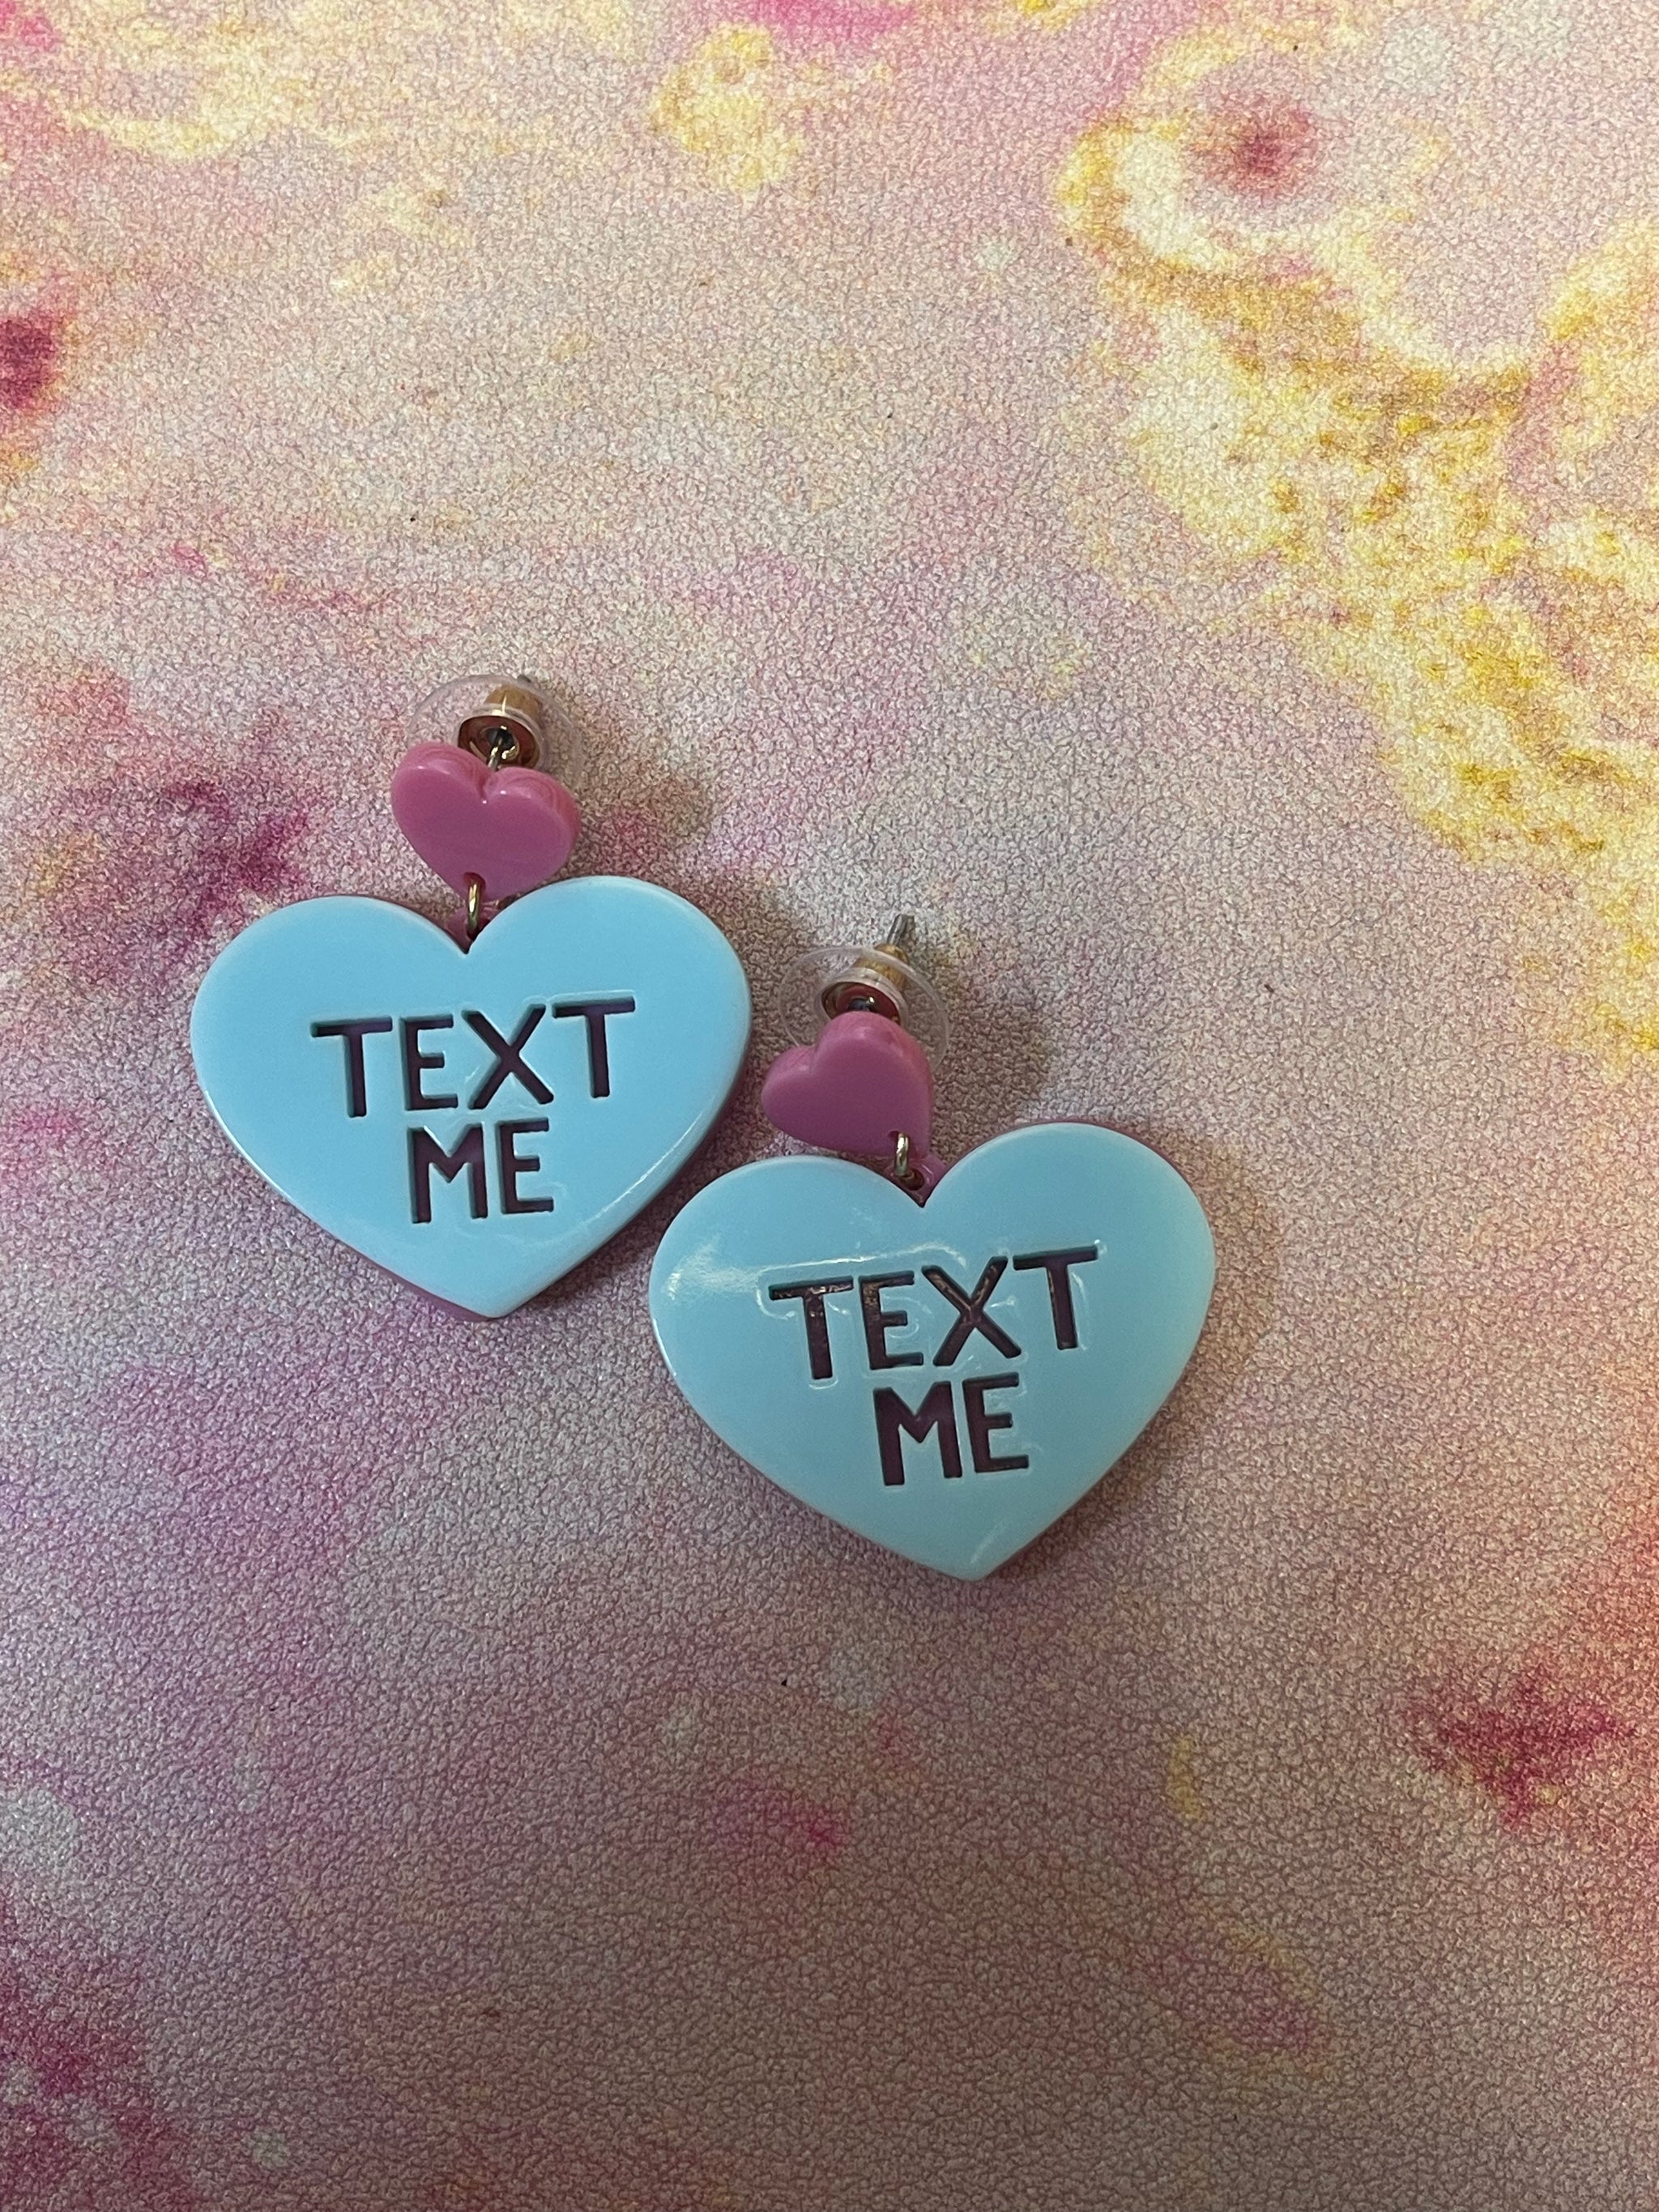 2.5 Valentine's Day Dangle Conversation Heart Earrings by hildie